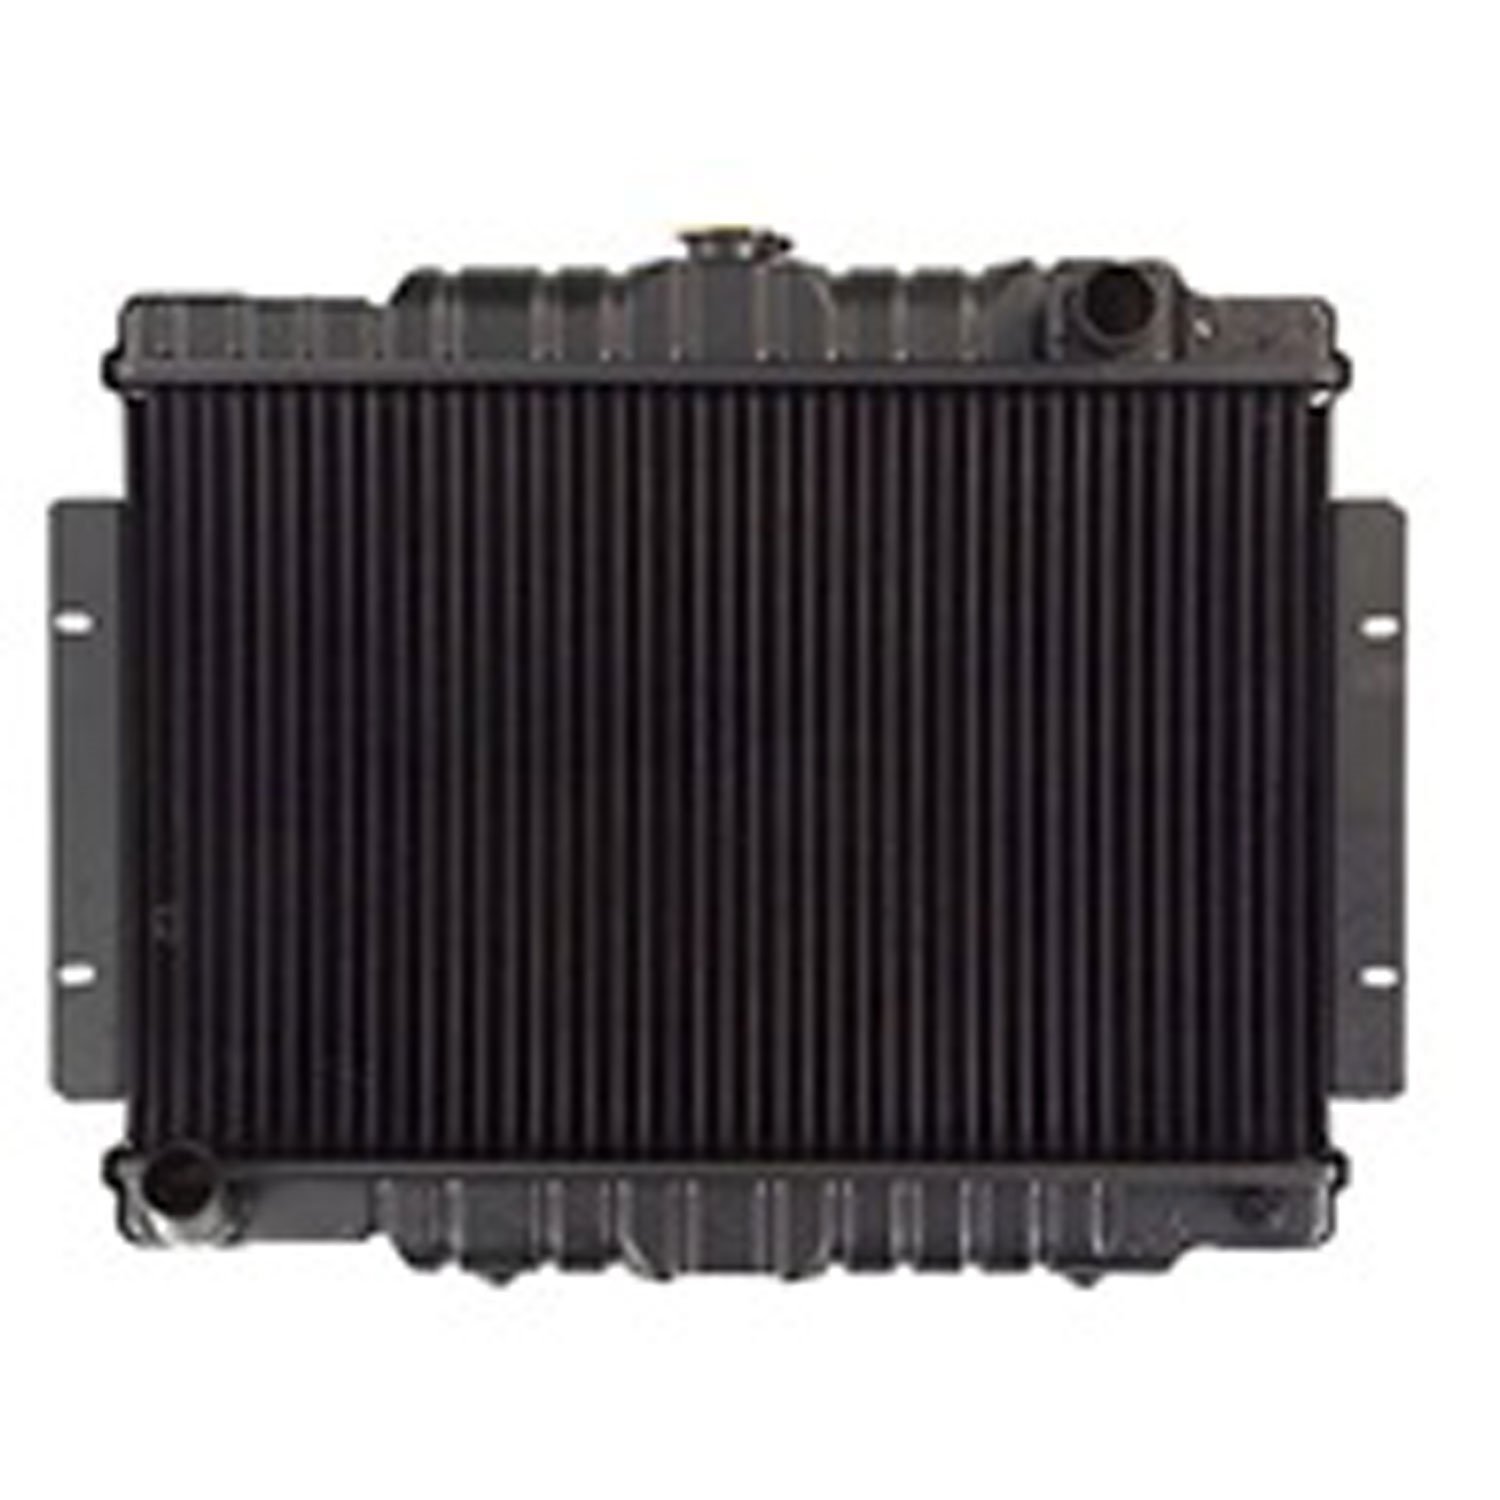 This center fill cap 3 row radiator from Omix-ADA fits 74-80 CJ5 74-75 CJ6 and 76-80 CJ7 with a 6 or